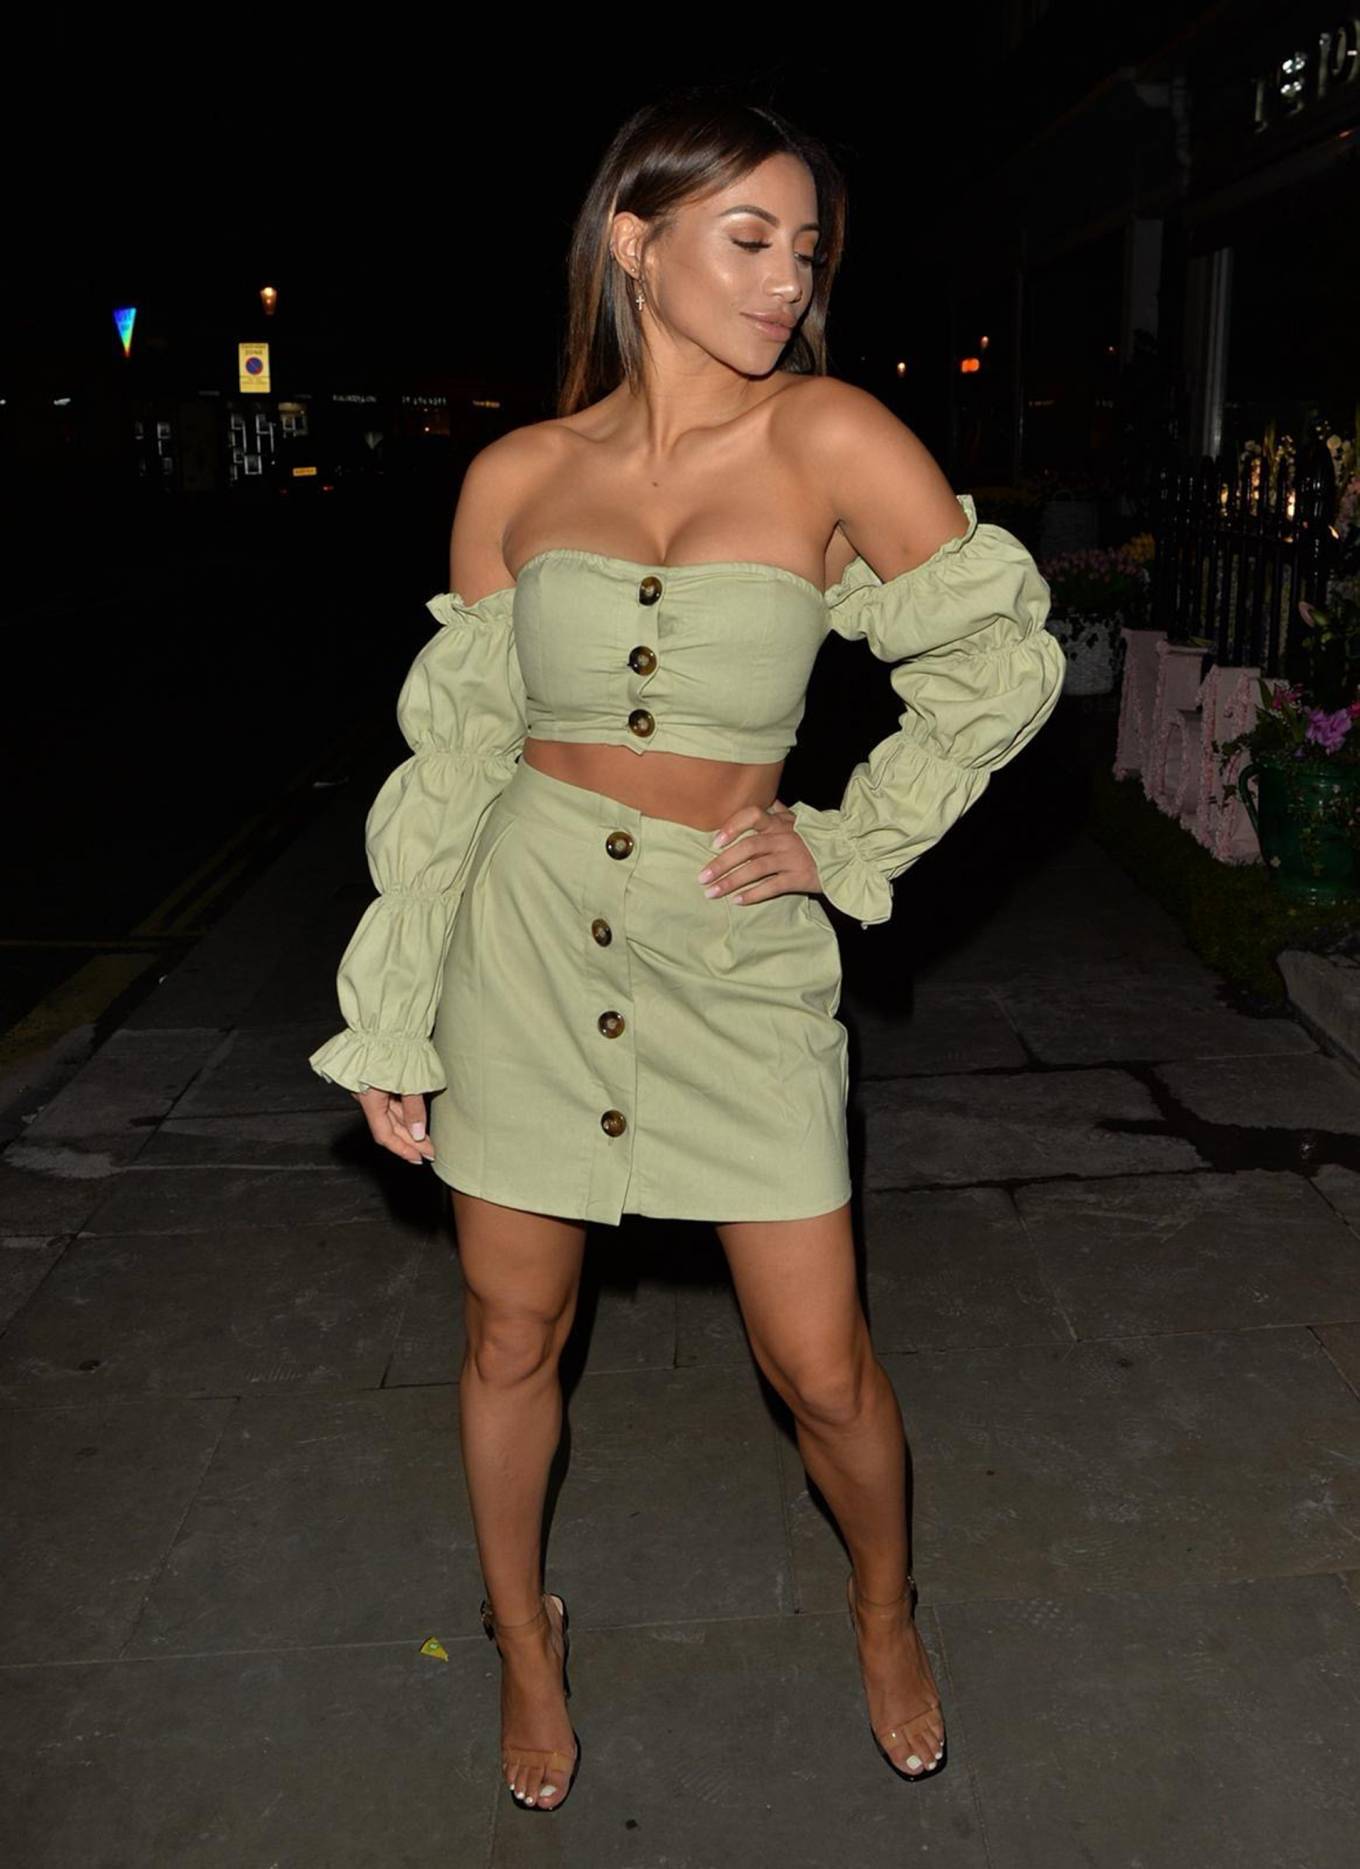 Kayleigh Morris 2020 : Kayleigh Morris – Looking chic while night out in London-08